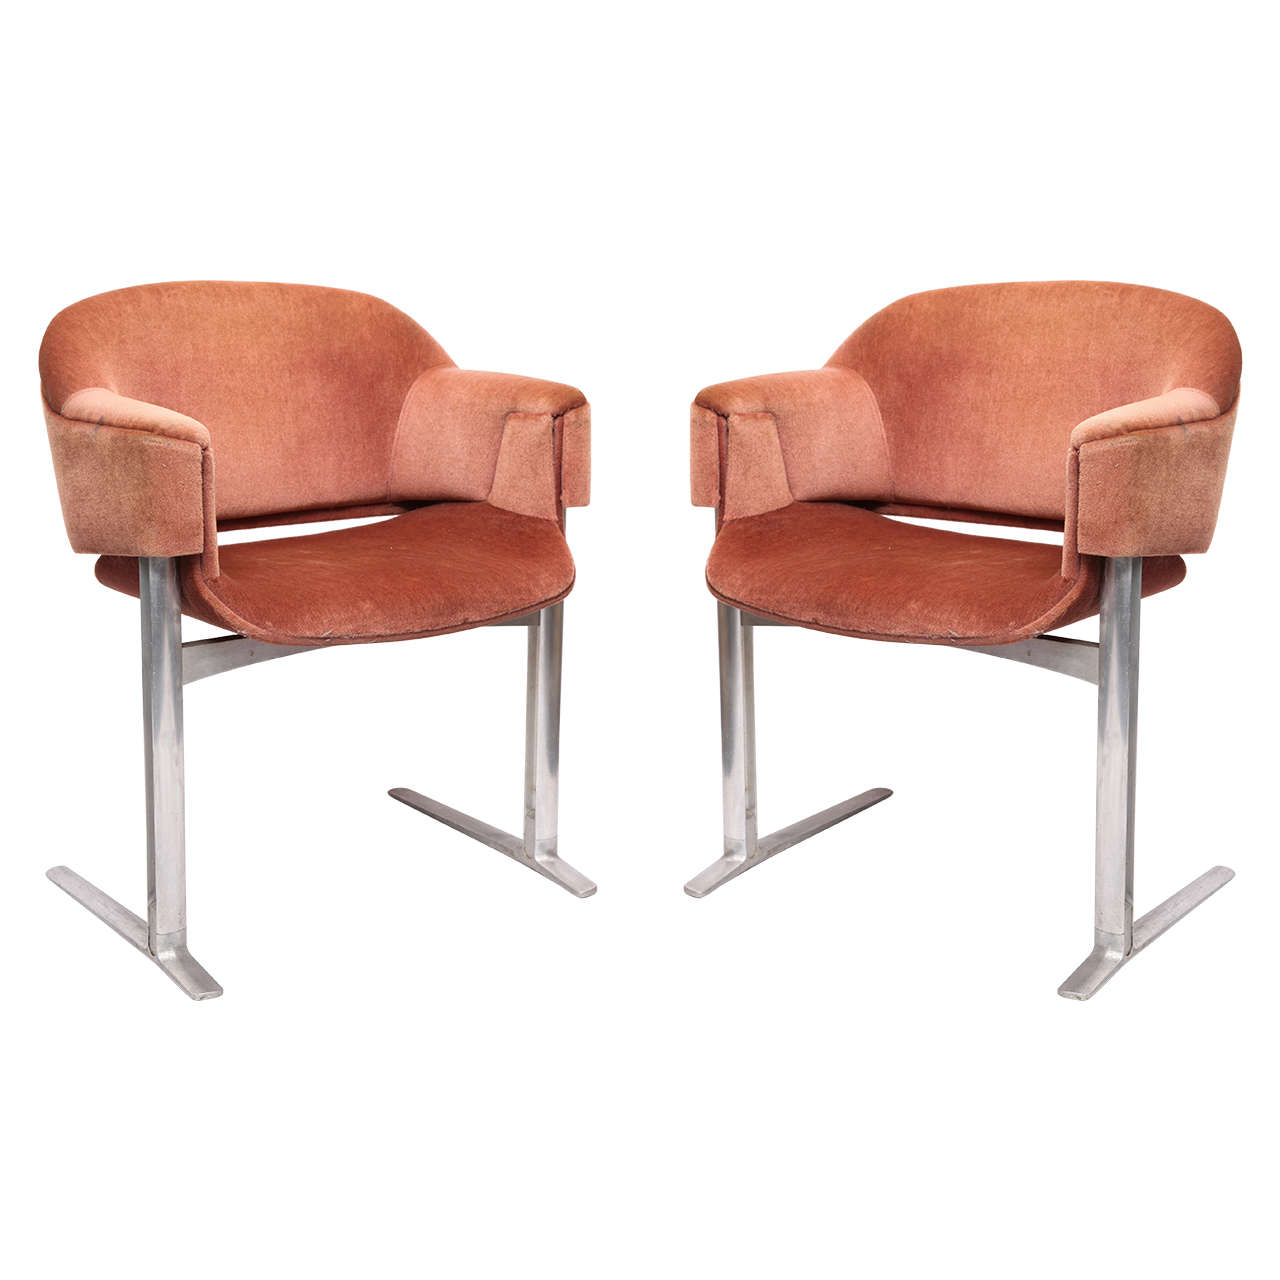 Pair of 1969 Modernist Chairs from QE2 Race Line by Robert Heritage